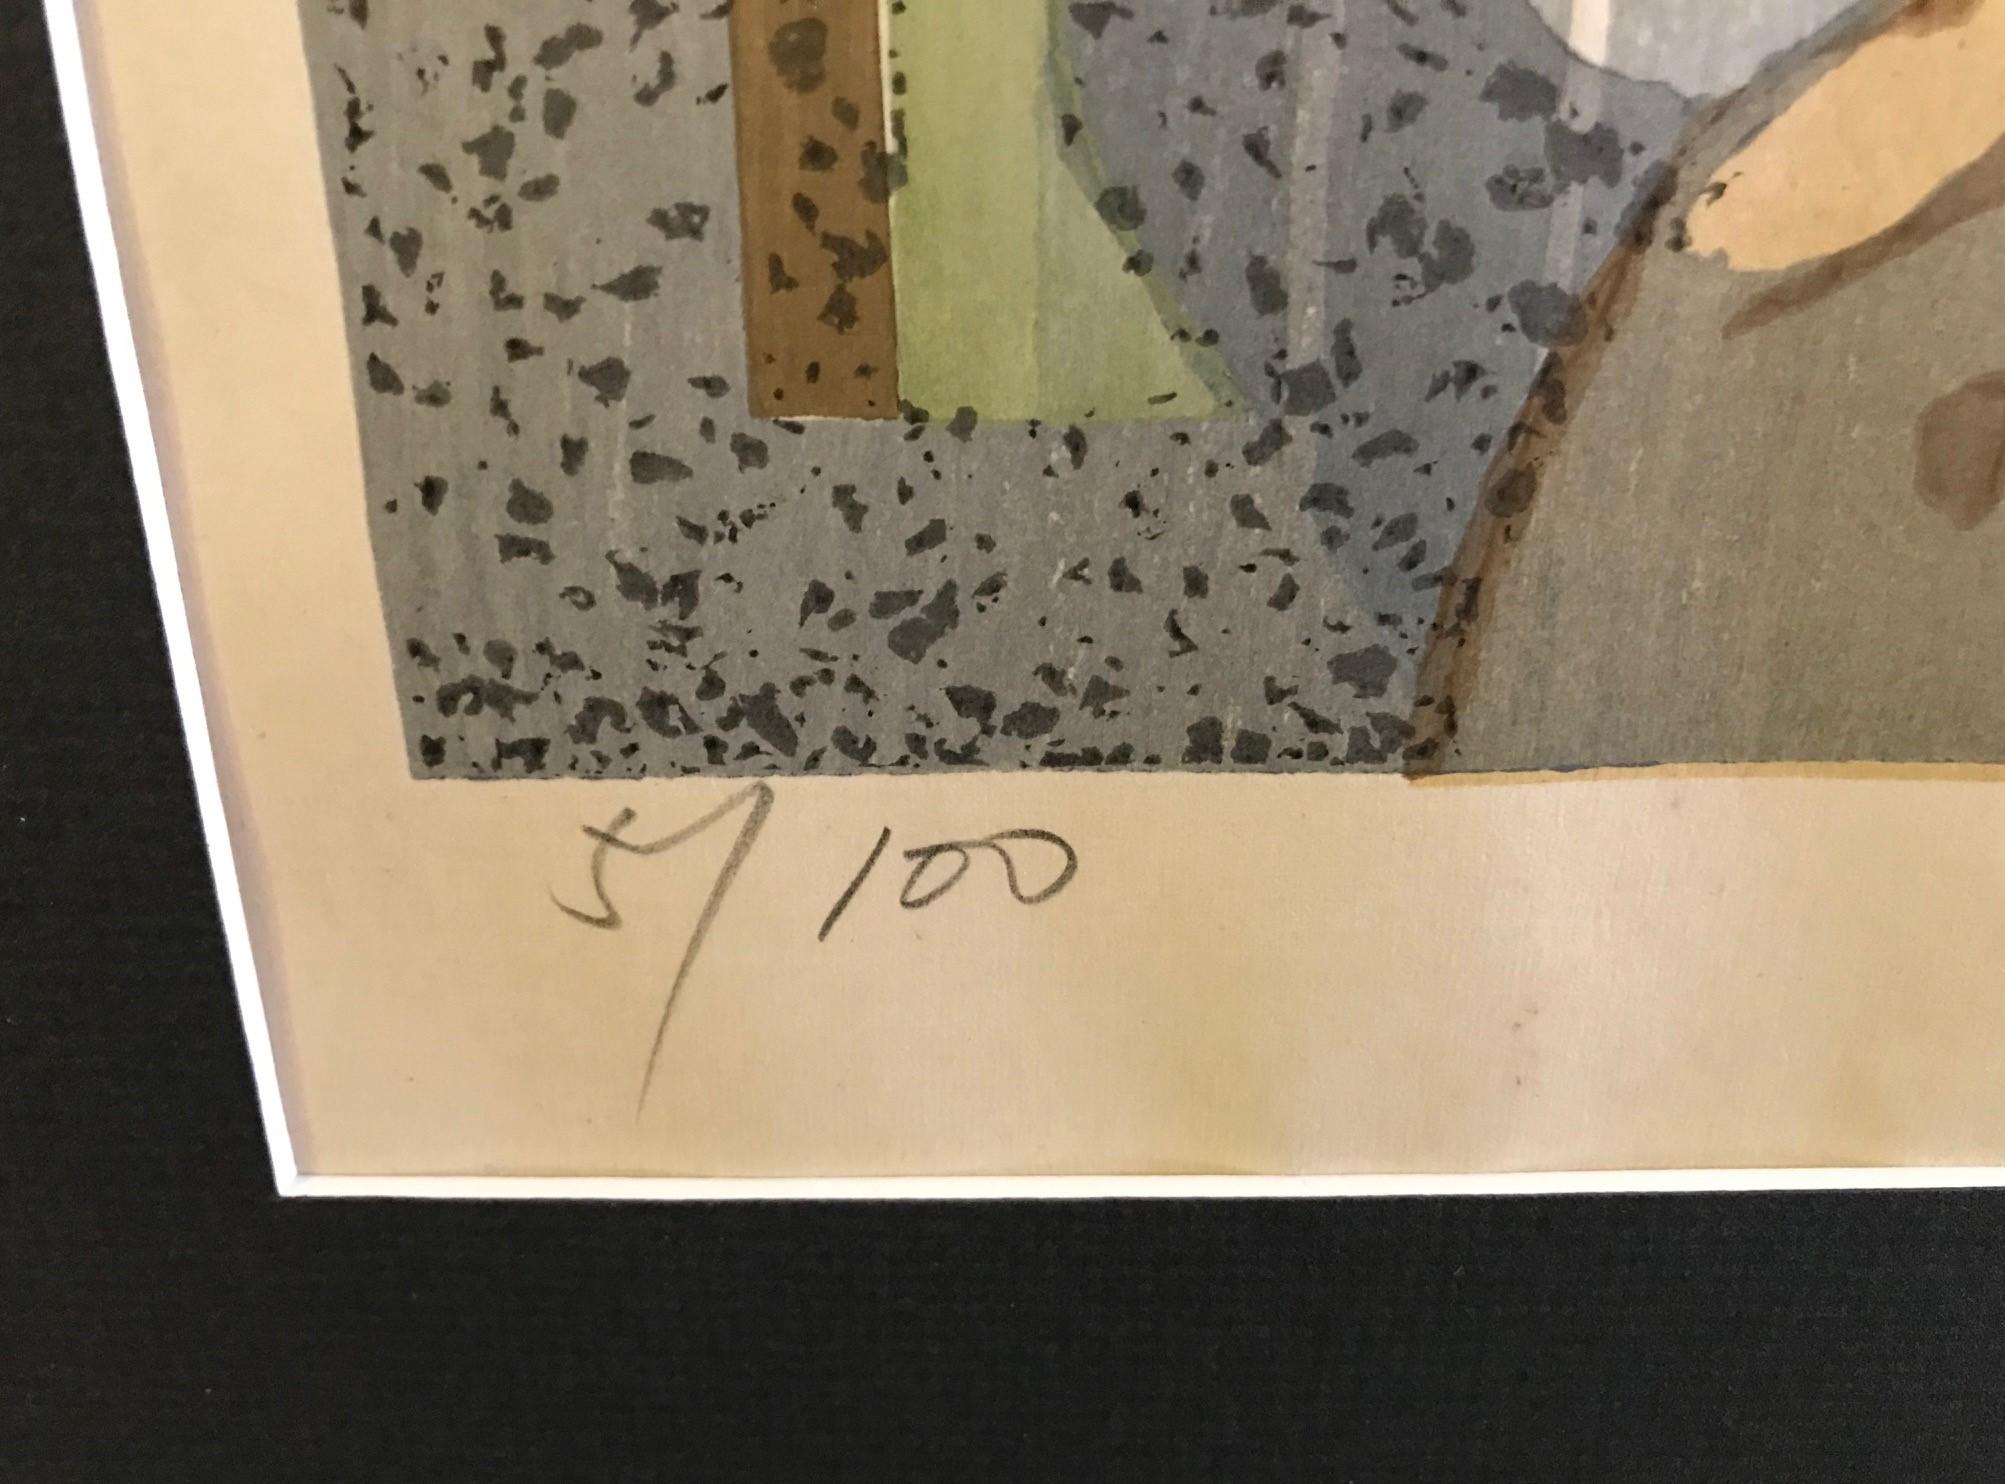 Junichiro Sekino Signed Limited Japanese Woodblock Print Mr. Ozek's Daughter In Good Condition For Sale In Studio City, CA